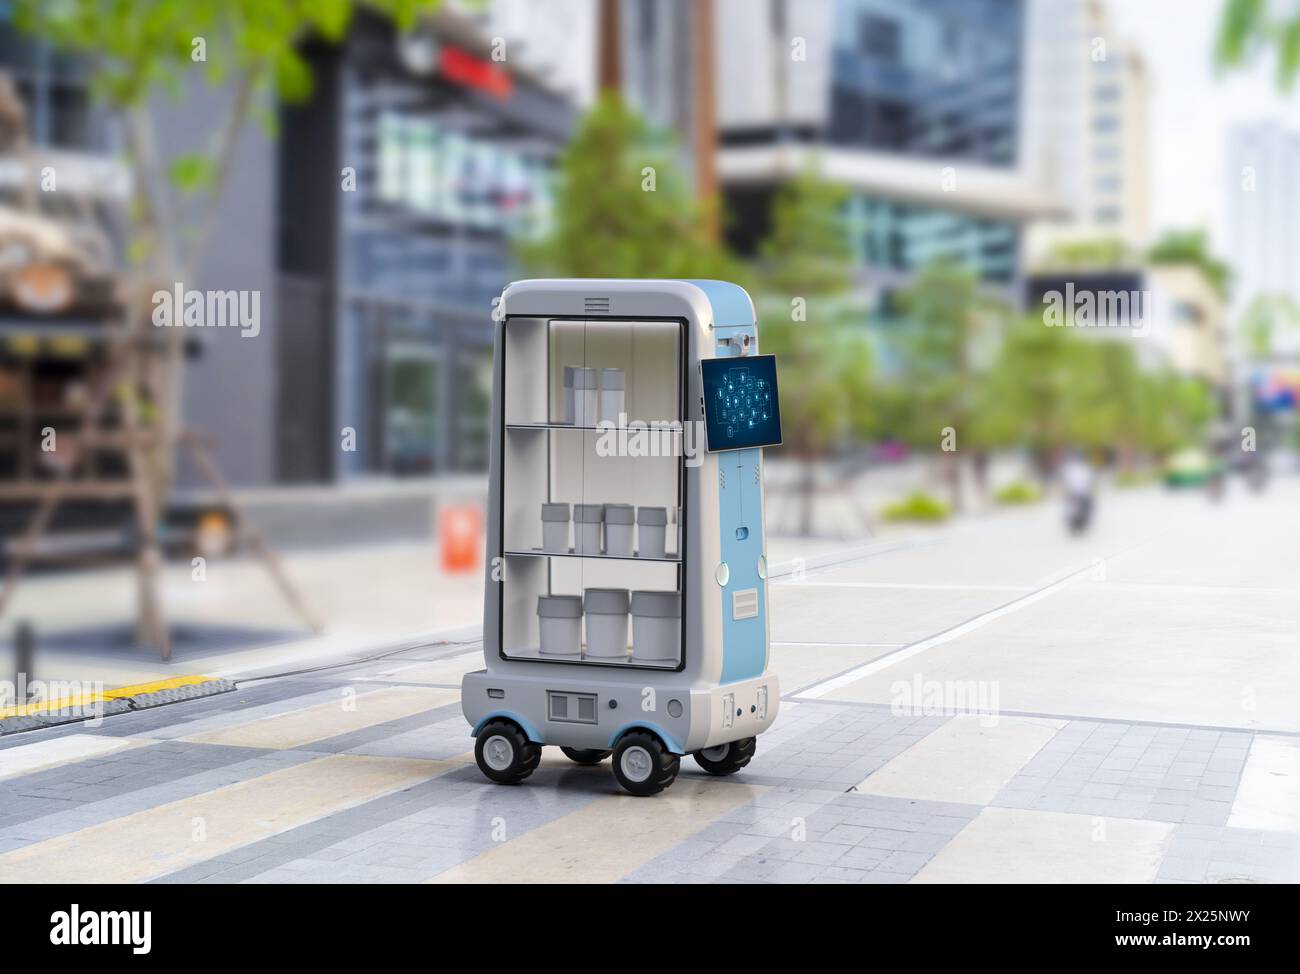 3d rendering delivery robot trolley or robotic assistant carry products Stock Photo